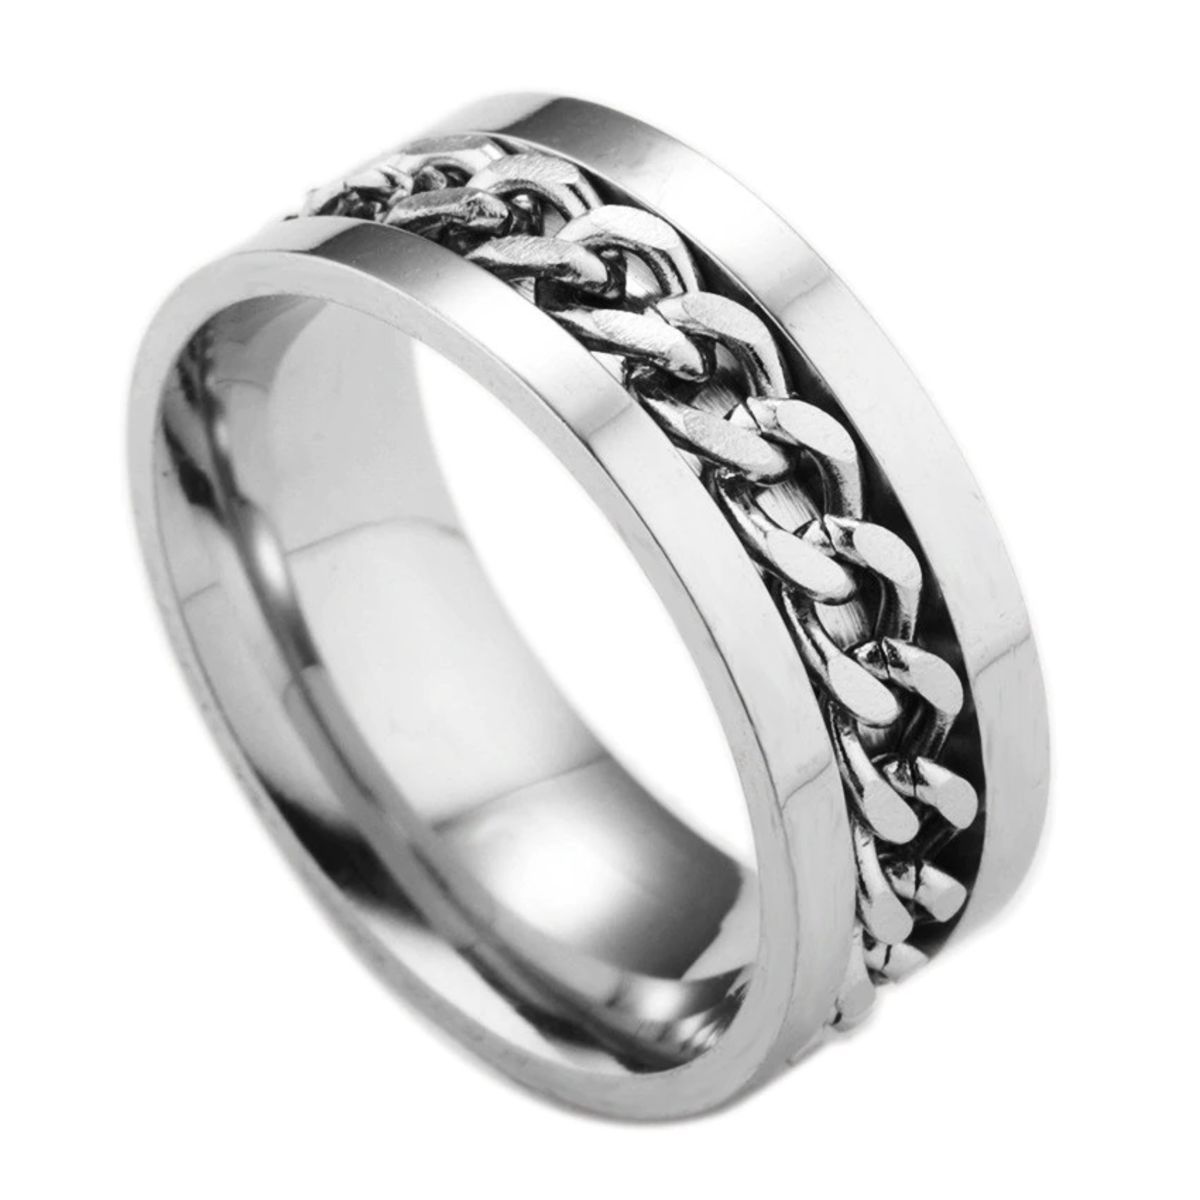 Buy Silver Stainless Steel Subtle Cut Ring Online - INOX Jewelry - Inox  Jewelry India